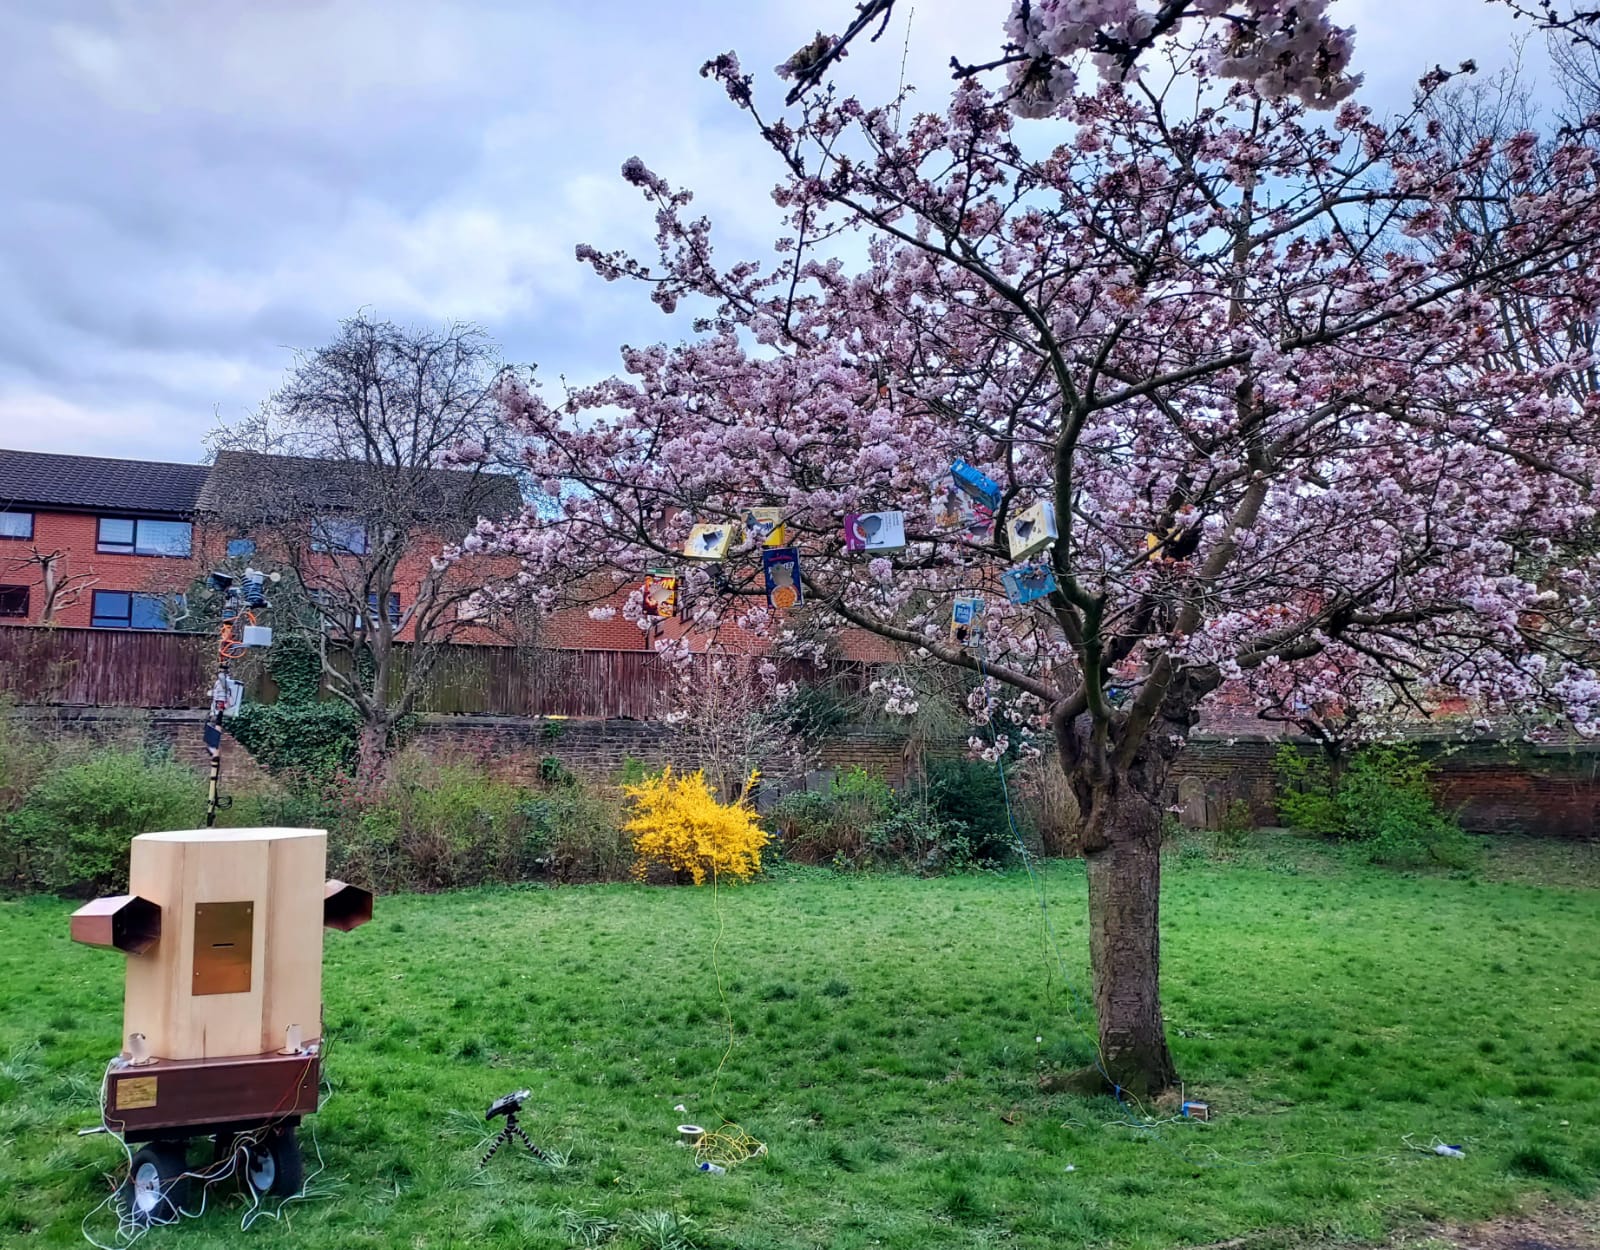 Future Machine sat next to the cherry tree in full pink blossomin Christ Church Gardens April 2021